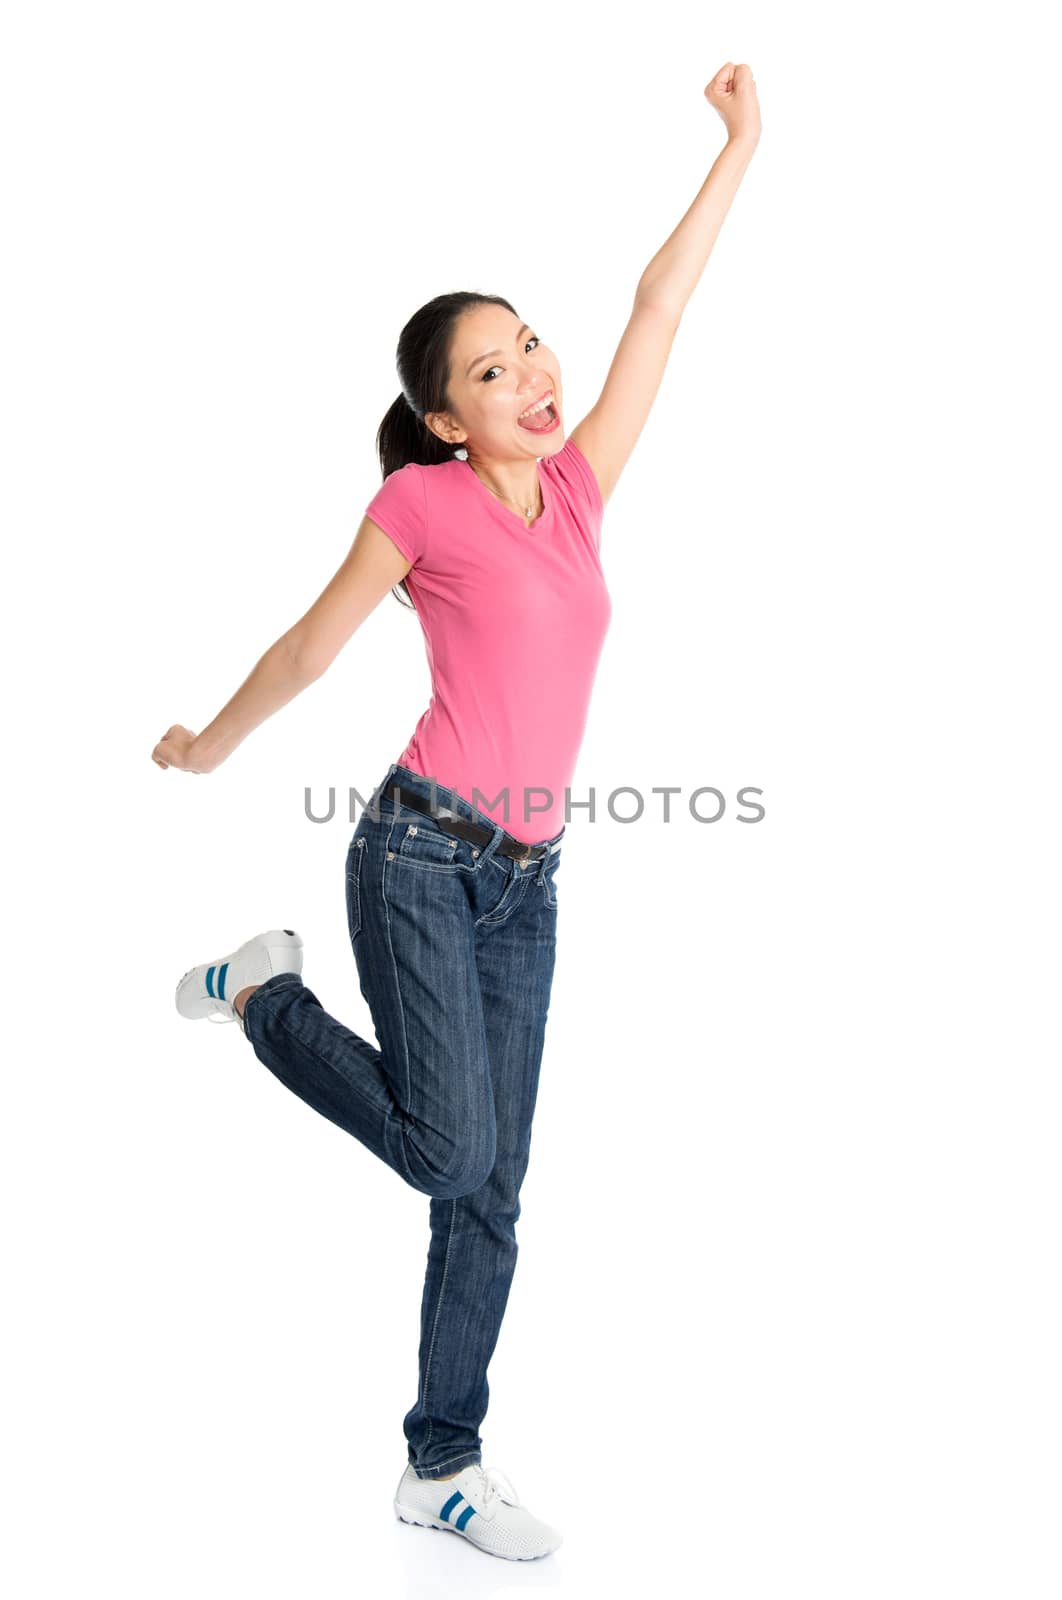 Portrait of young Asian girl in pink shirt and jeans jumping happily, full body standing isolated on white background.